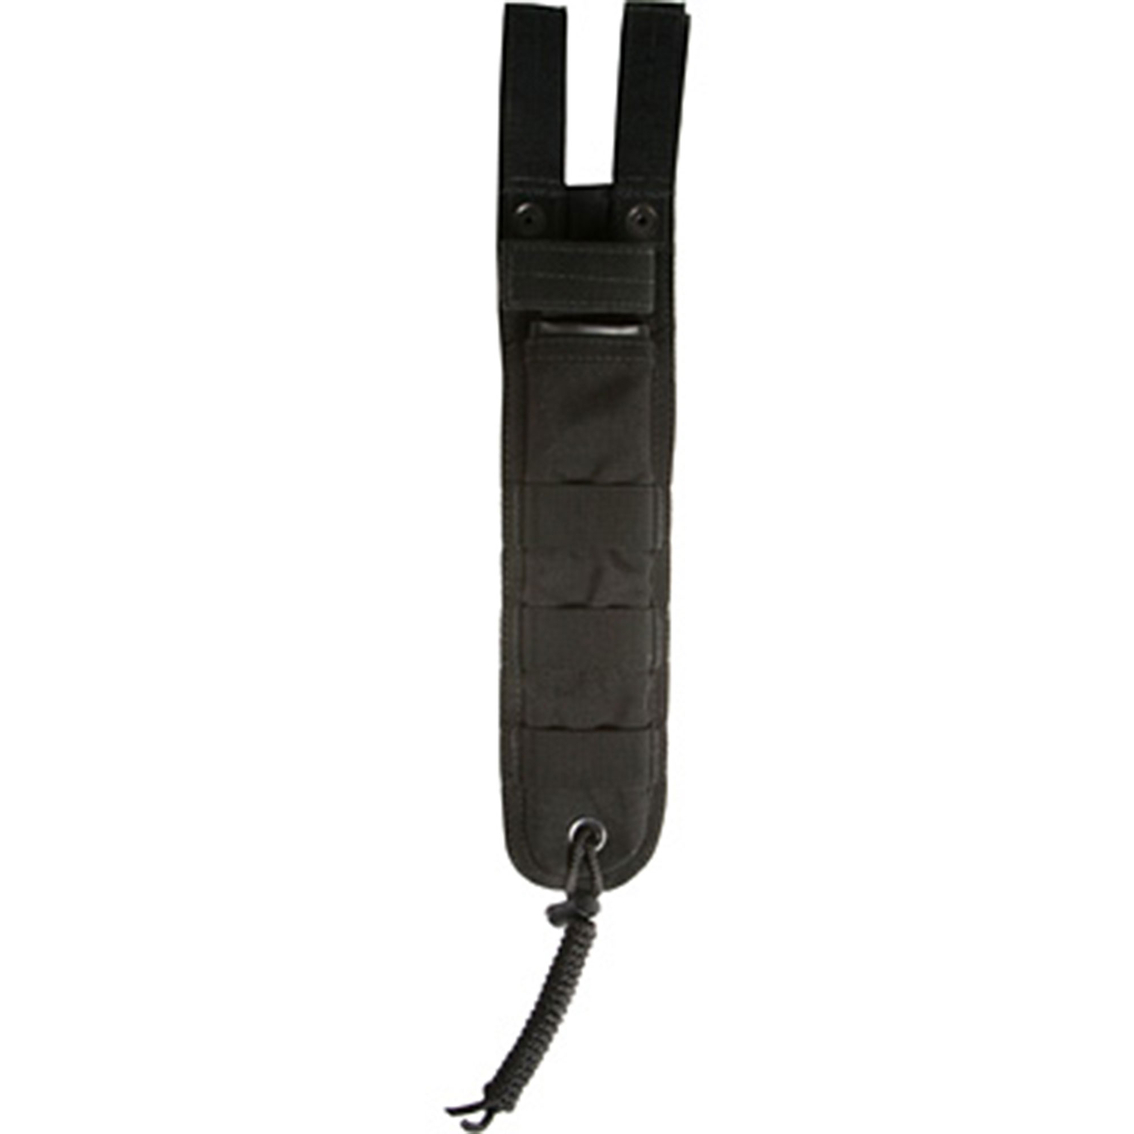 Spec Ops Safety Knife with Holster